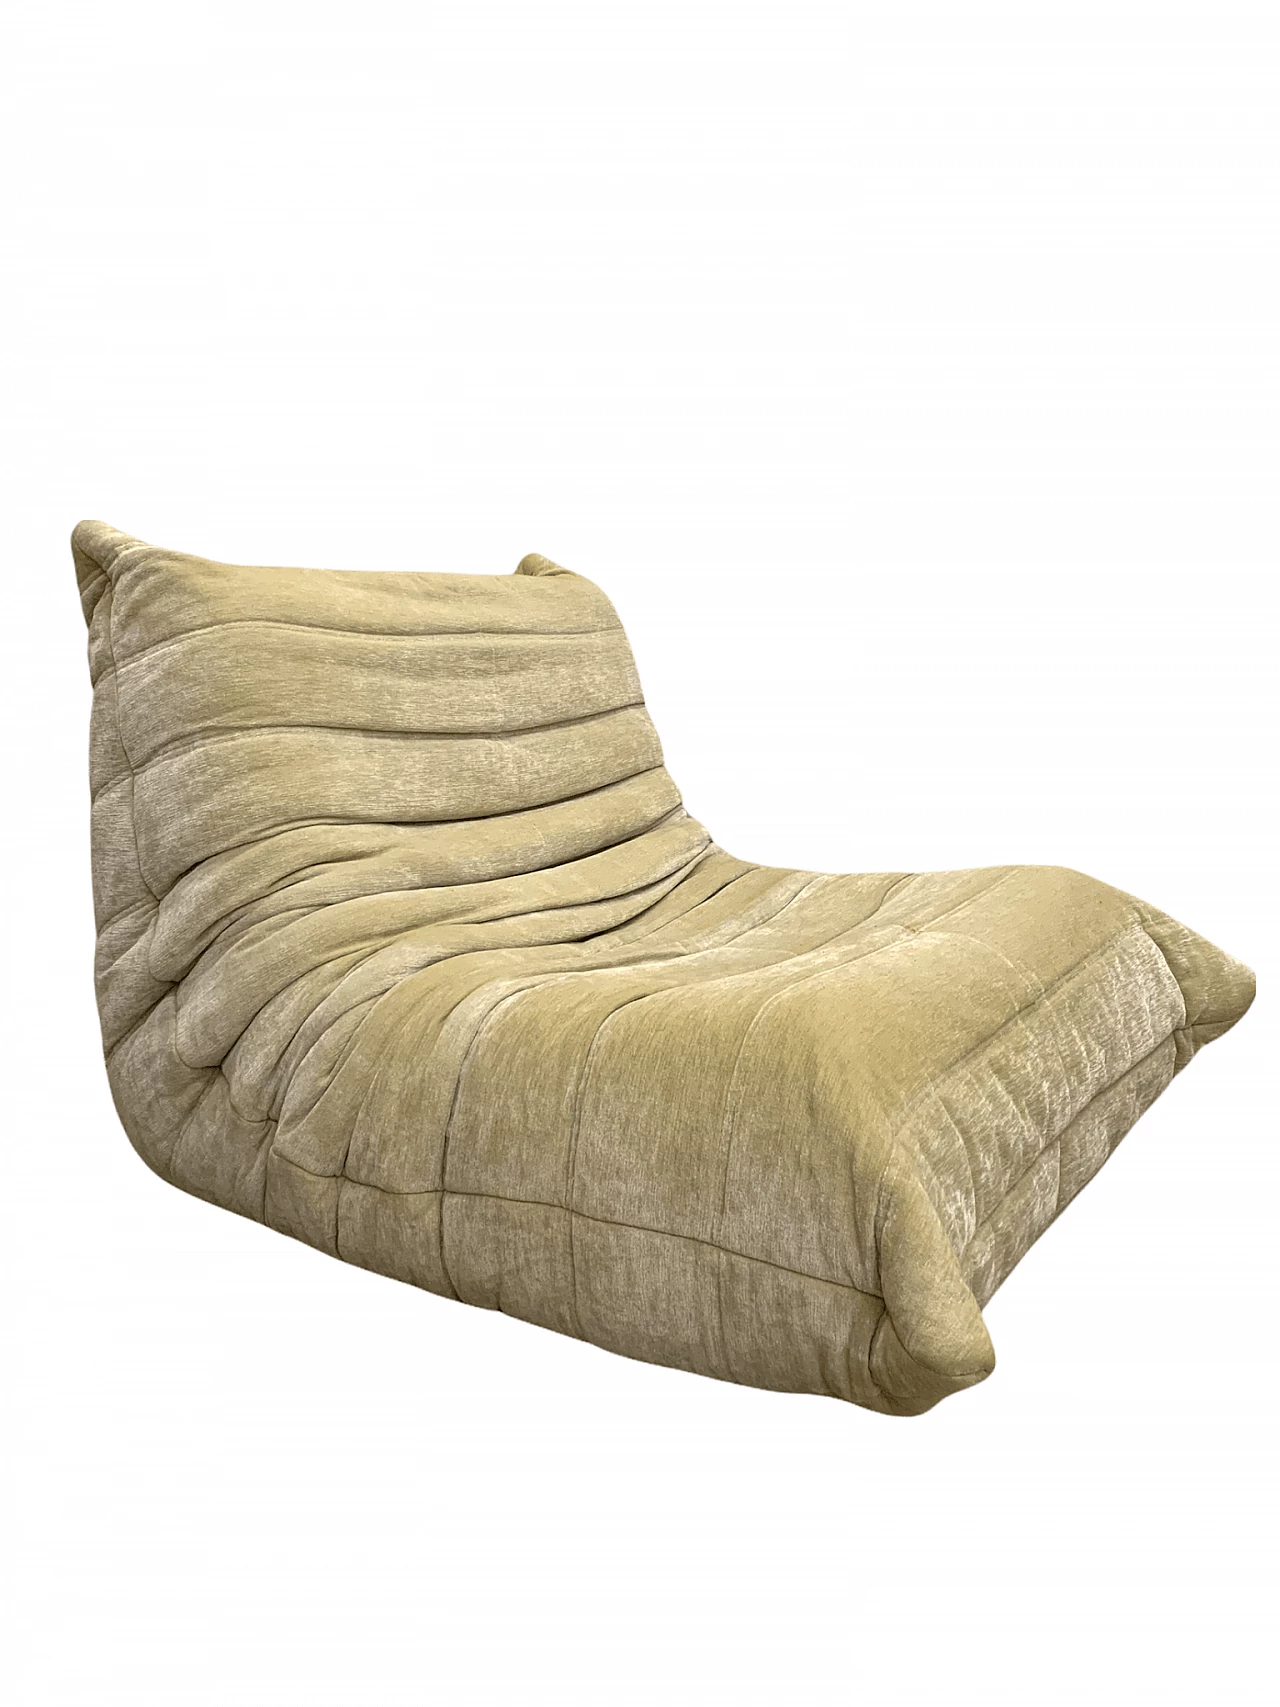 Togo armchair in fabric by Michel Ducaroy for Lignet Roset, 70s 1347012